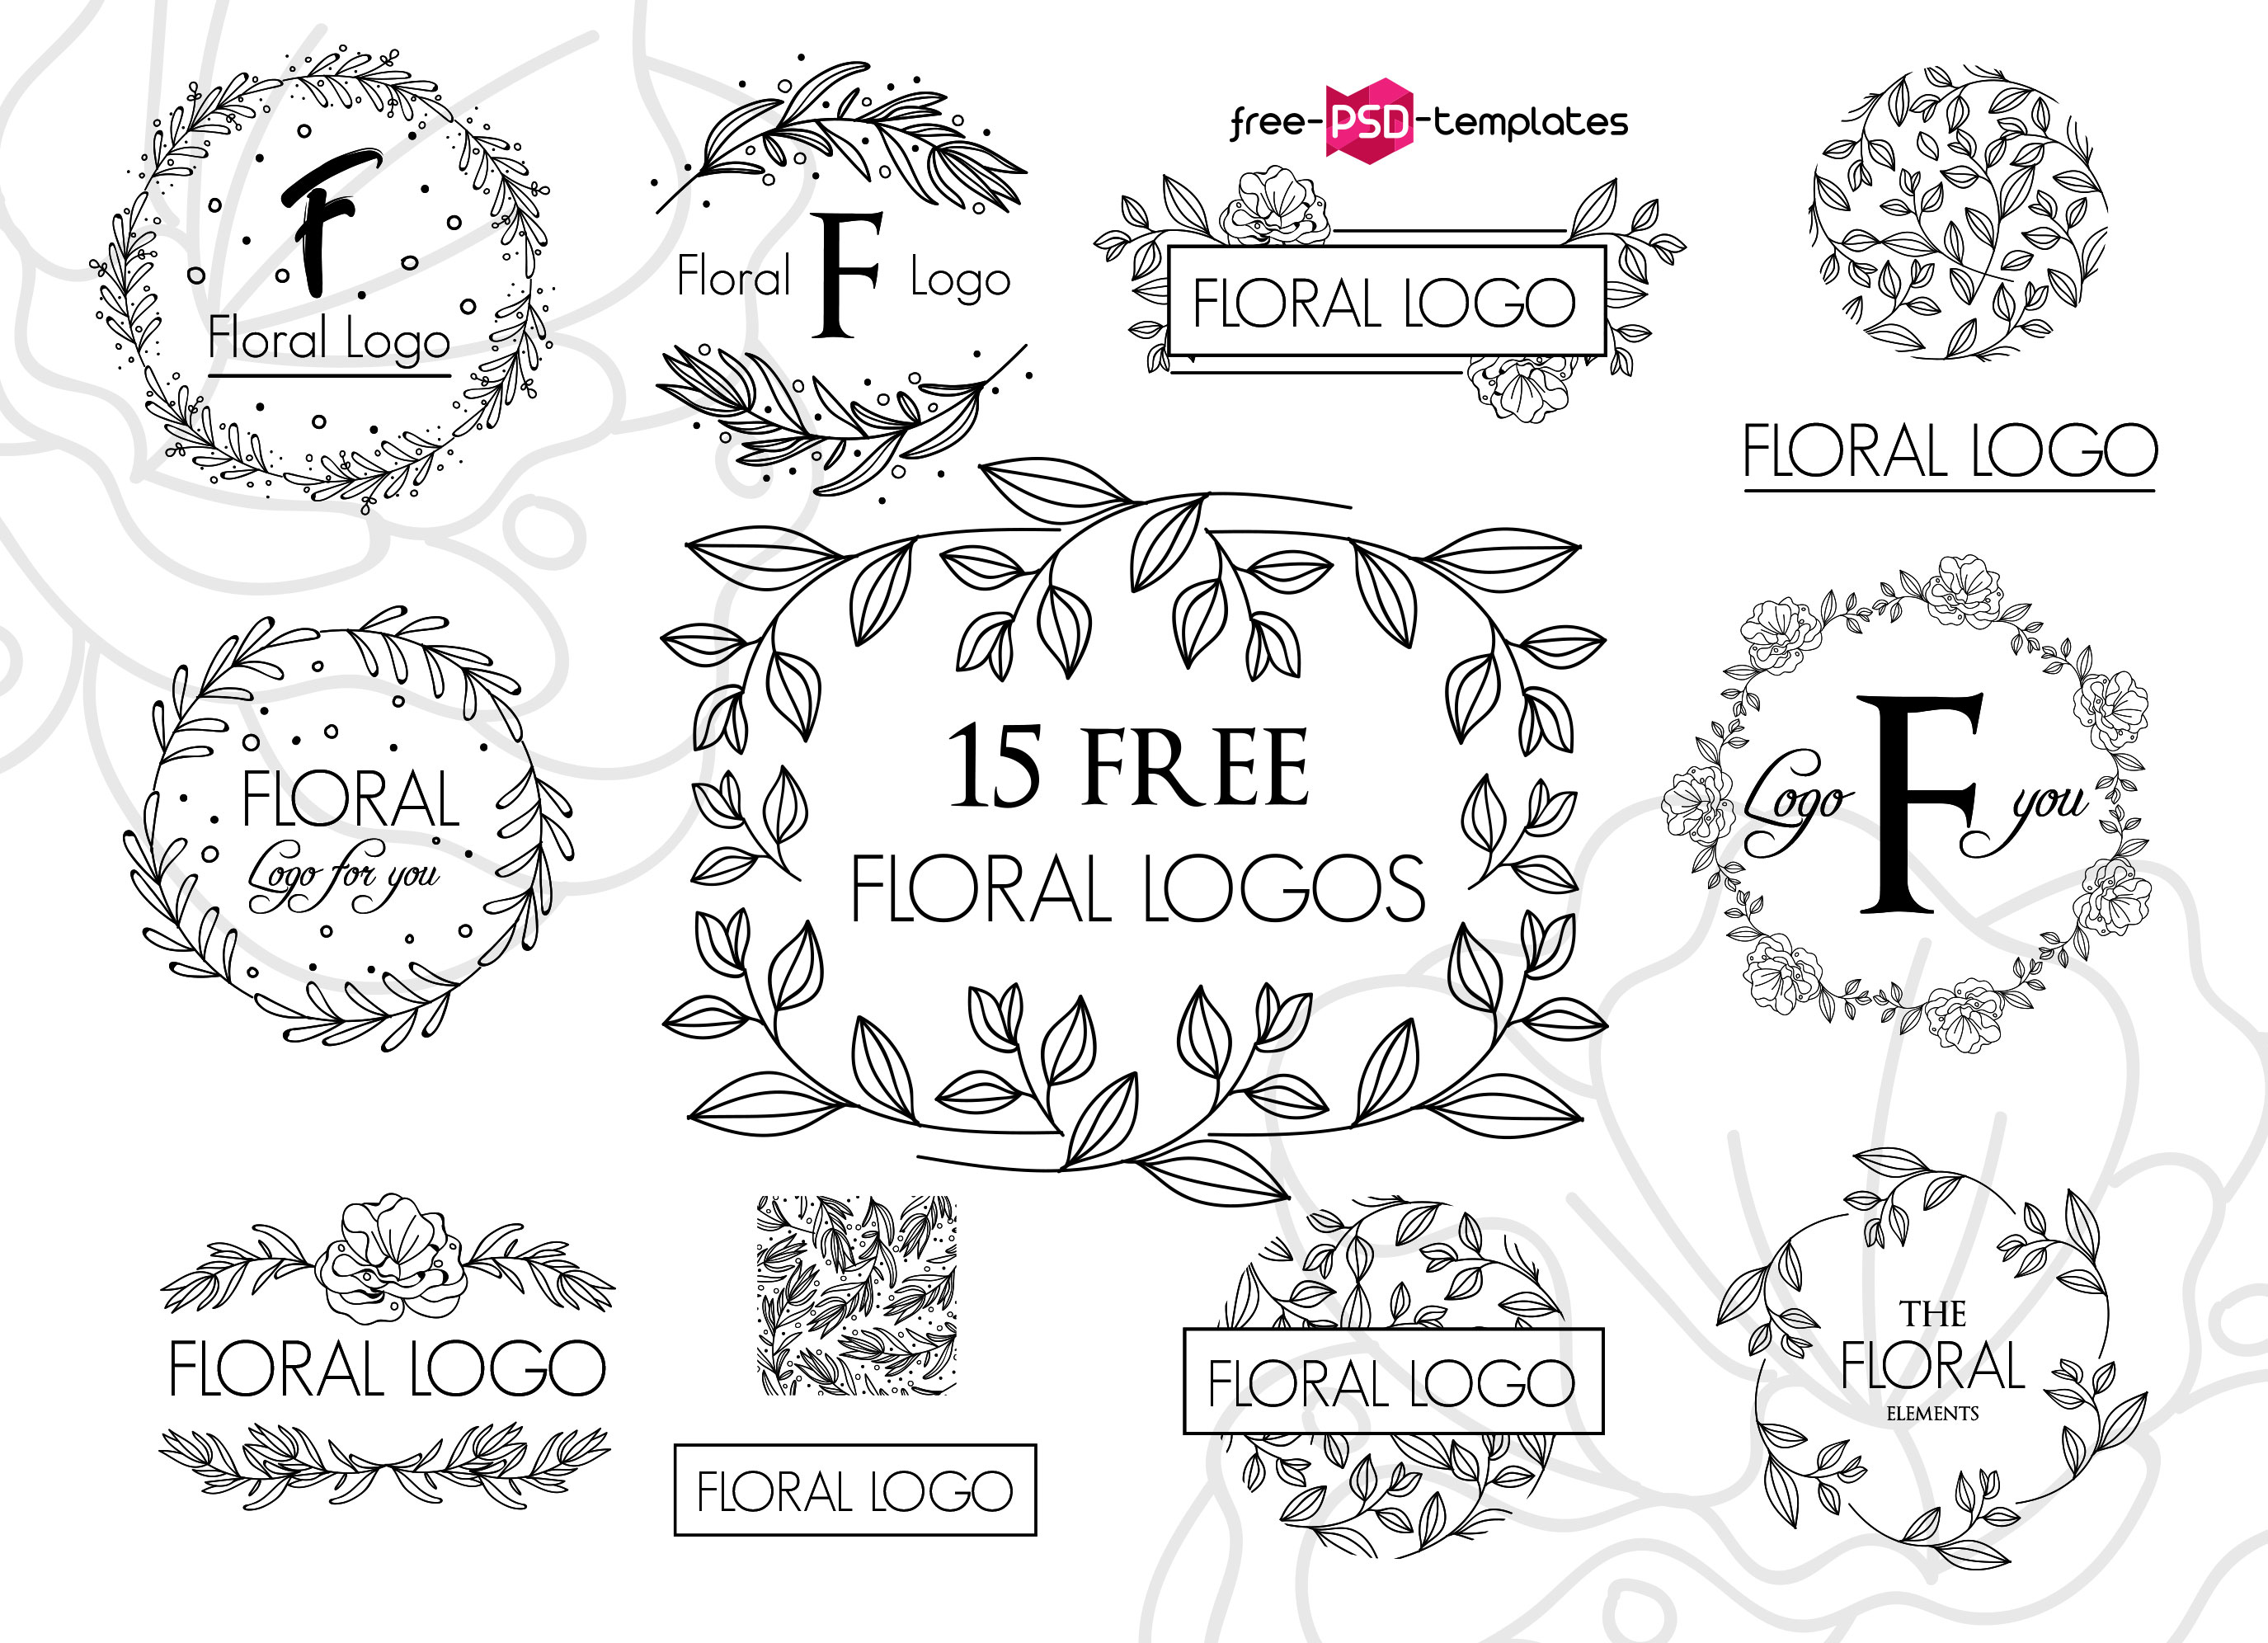 Download 86+ Absolutely Free Logos templates for business and Premium Version! | Free PSD Templates